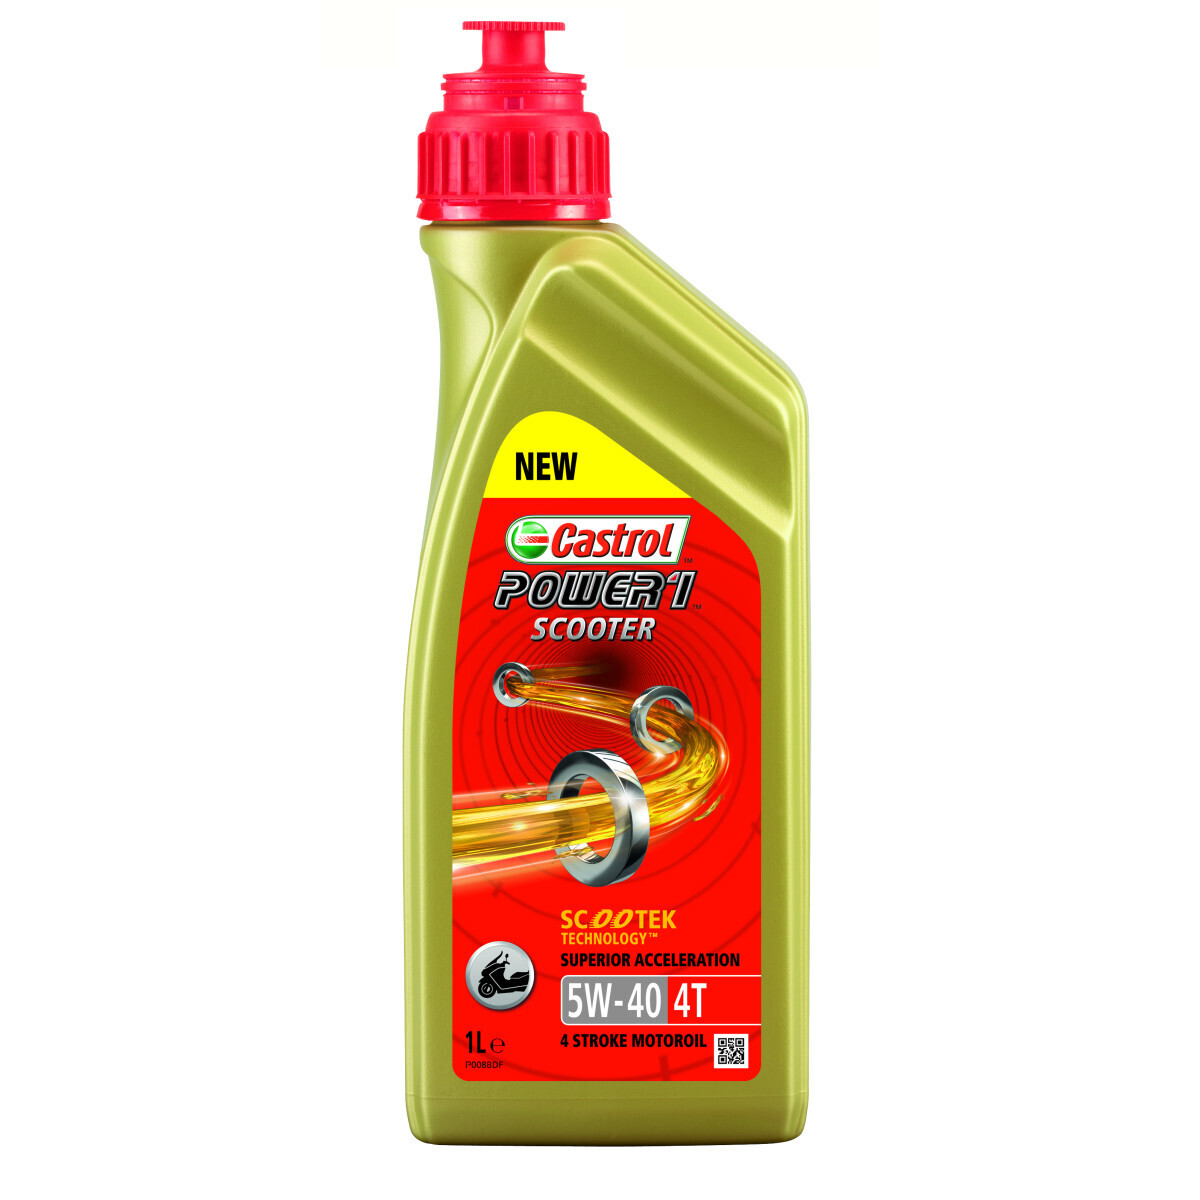 CASTROL
POWER 1 SCOOTER 4-STROKE SAE 5W40 PARTLY SYNTHETIC 1 LITER